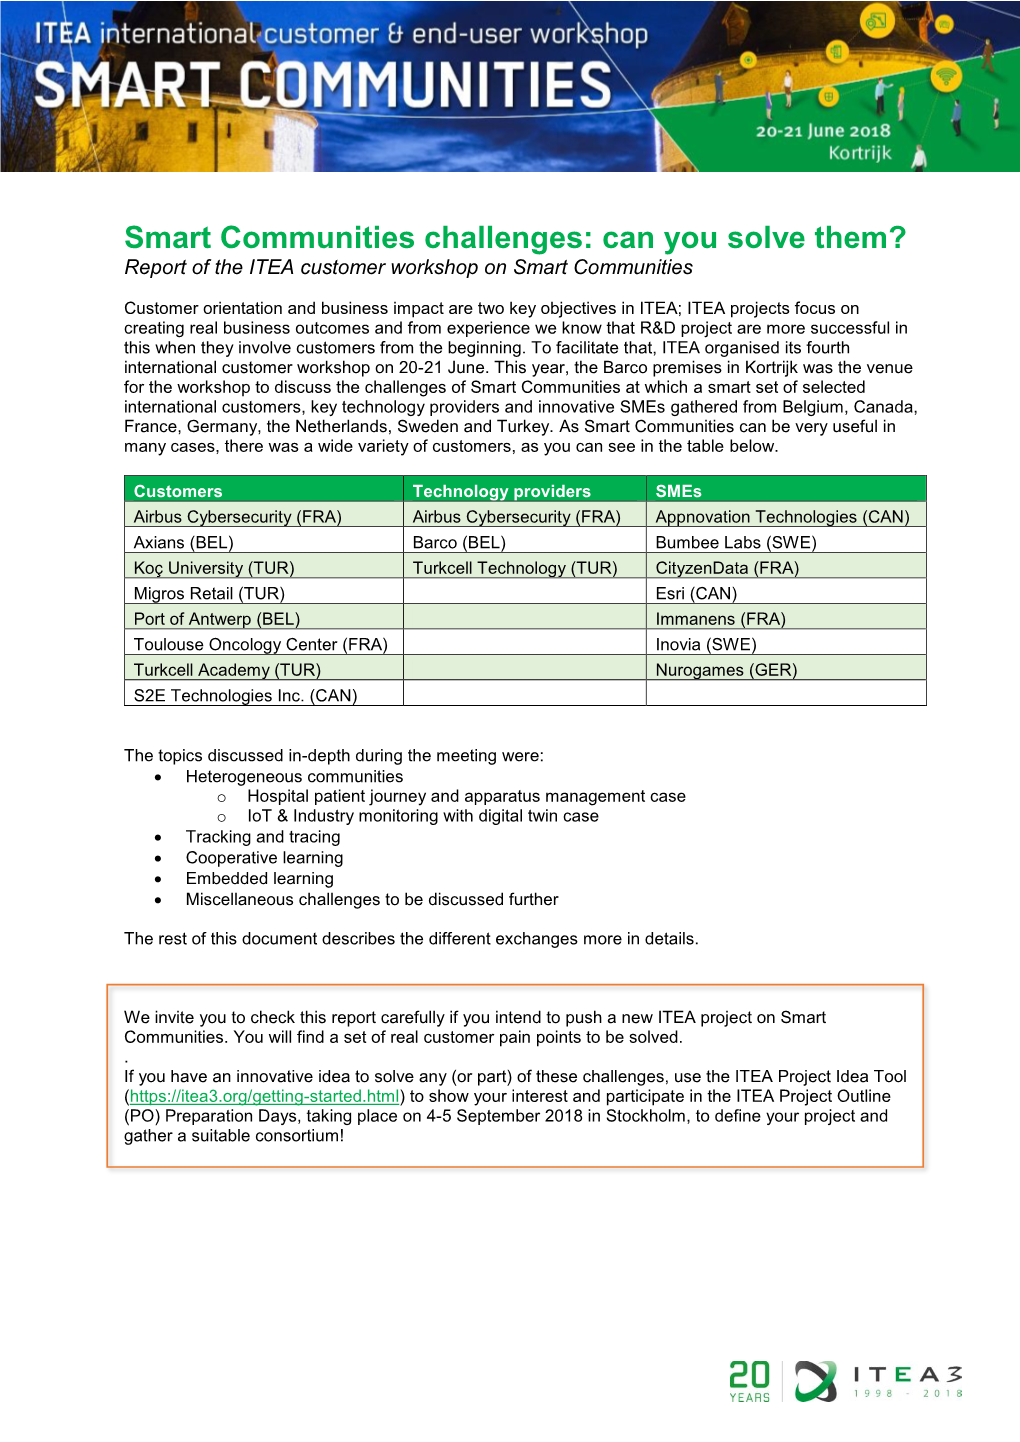 Smart Communities Challenges: Can You Solve Them? Report of the ITEA Customer Workshop on Smart Communities